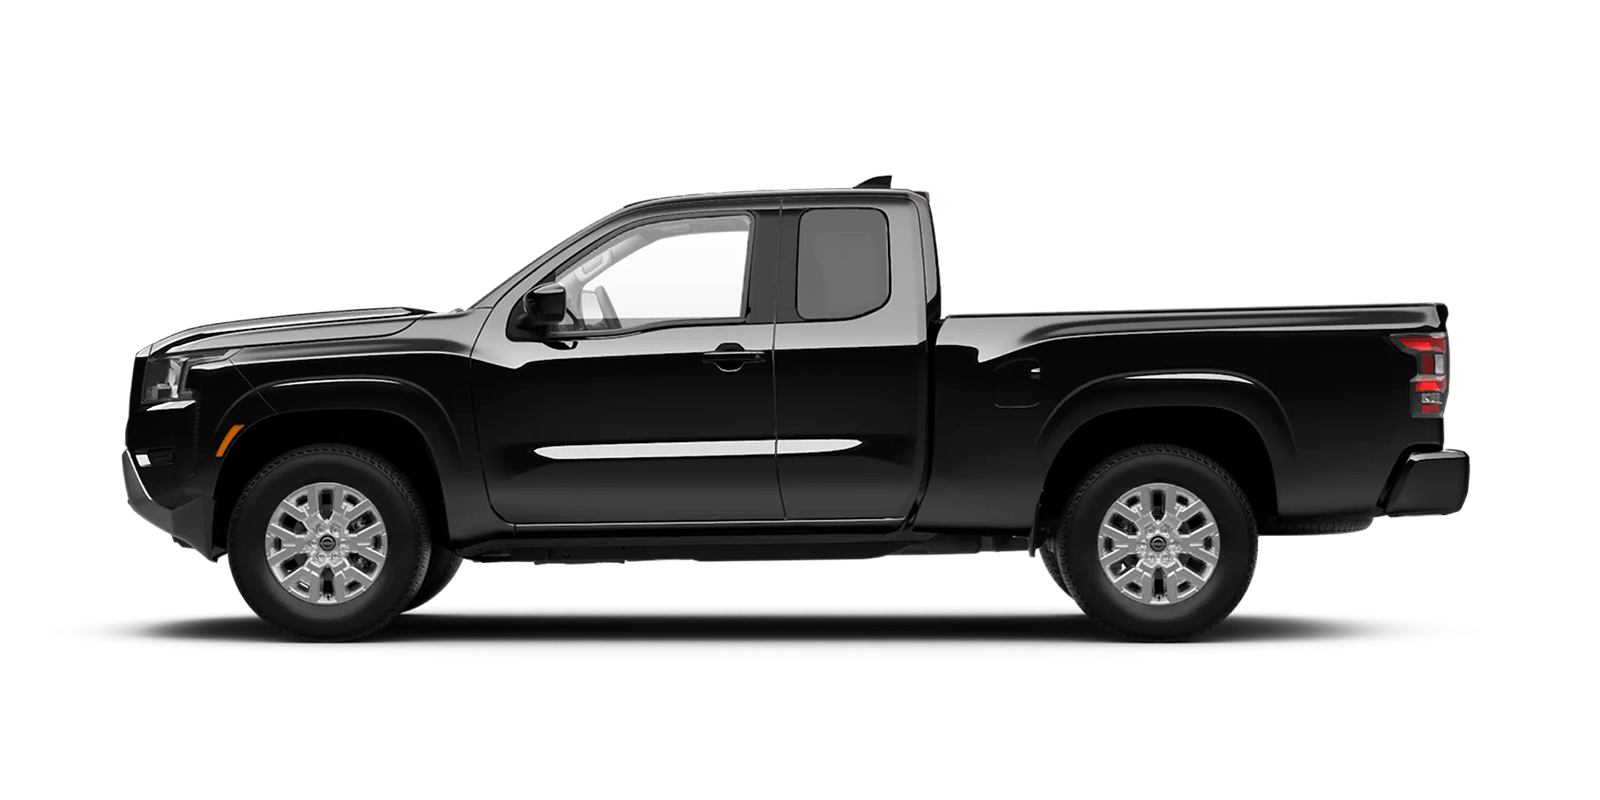 2022 Frontier King Cab SV 4x2 in Super Black | Rusty Wallace Nissan in Knoxville TN